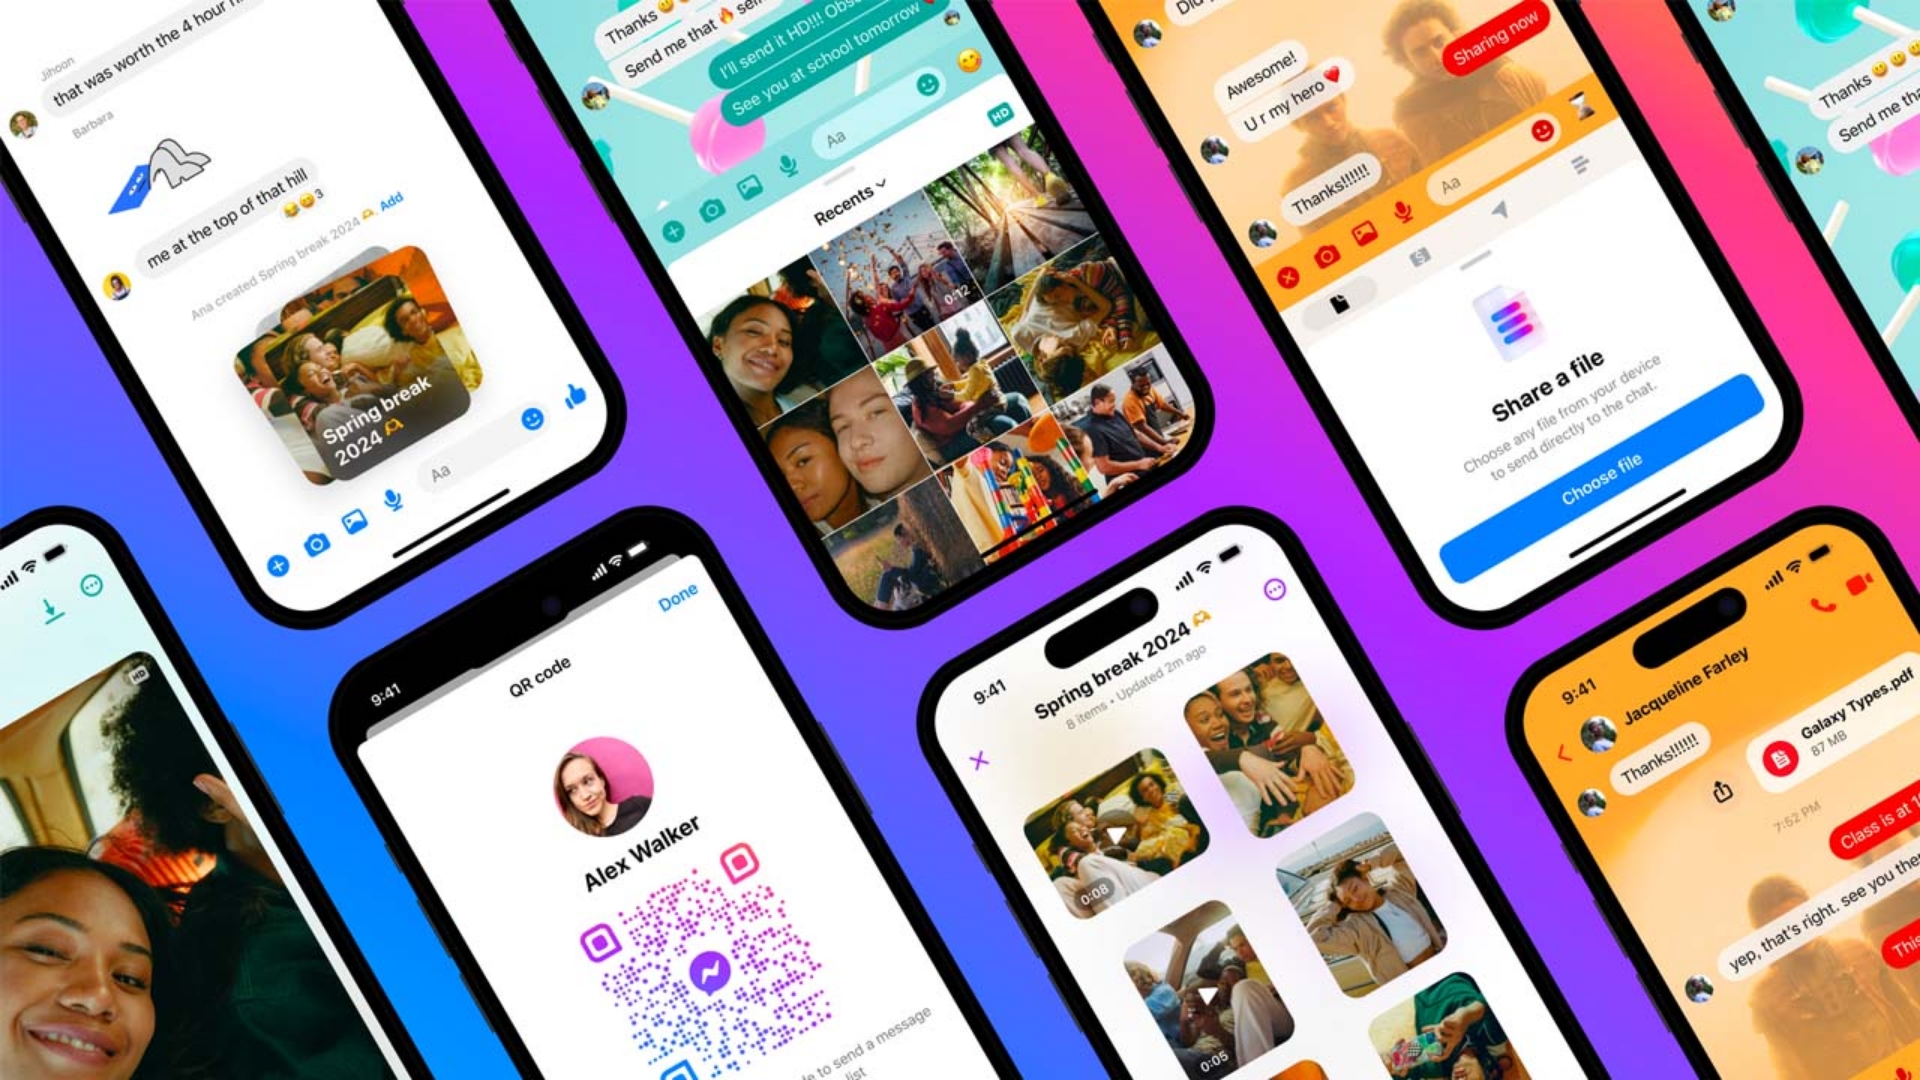 Meta has announced major updates to Facebook Messenger, including HD photos, shared albums, QR code additions, and 100MB file sharing